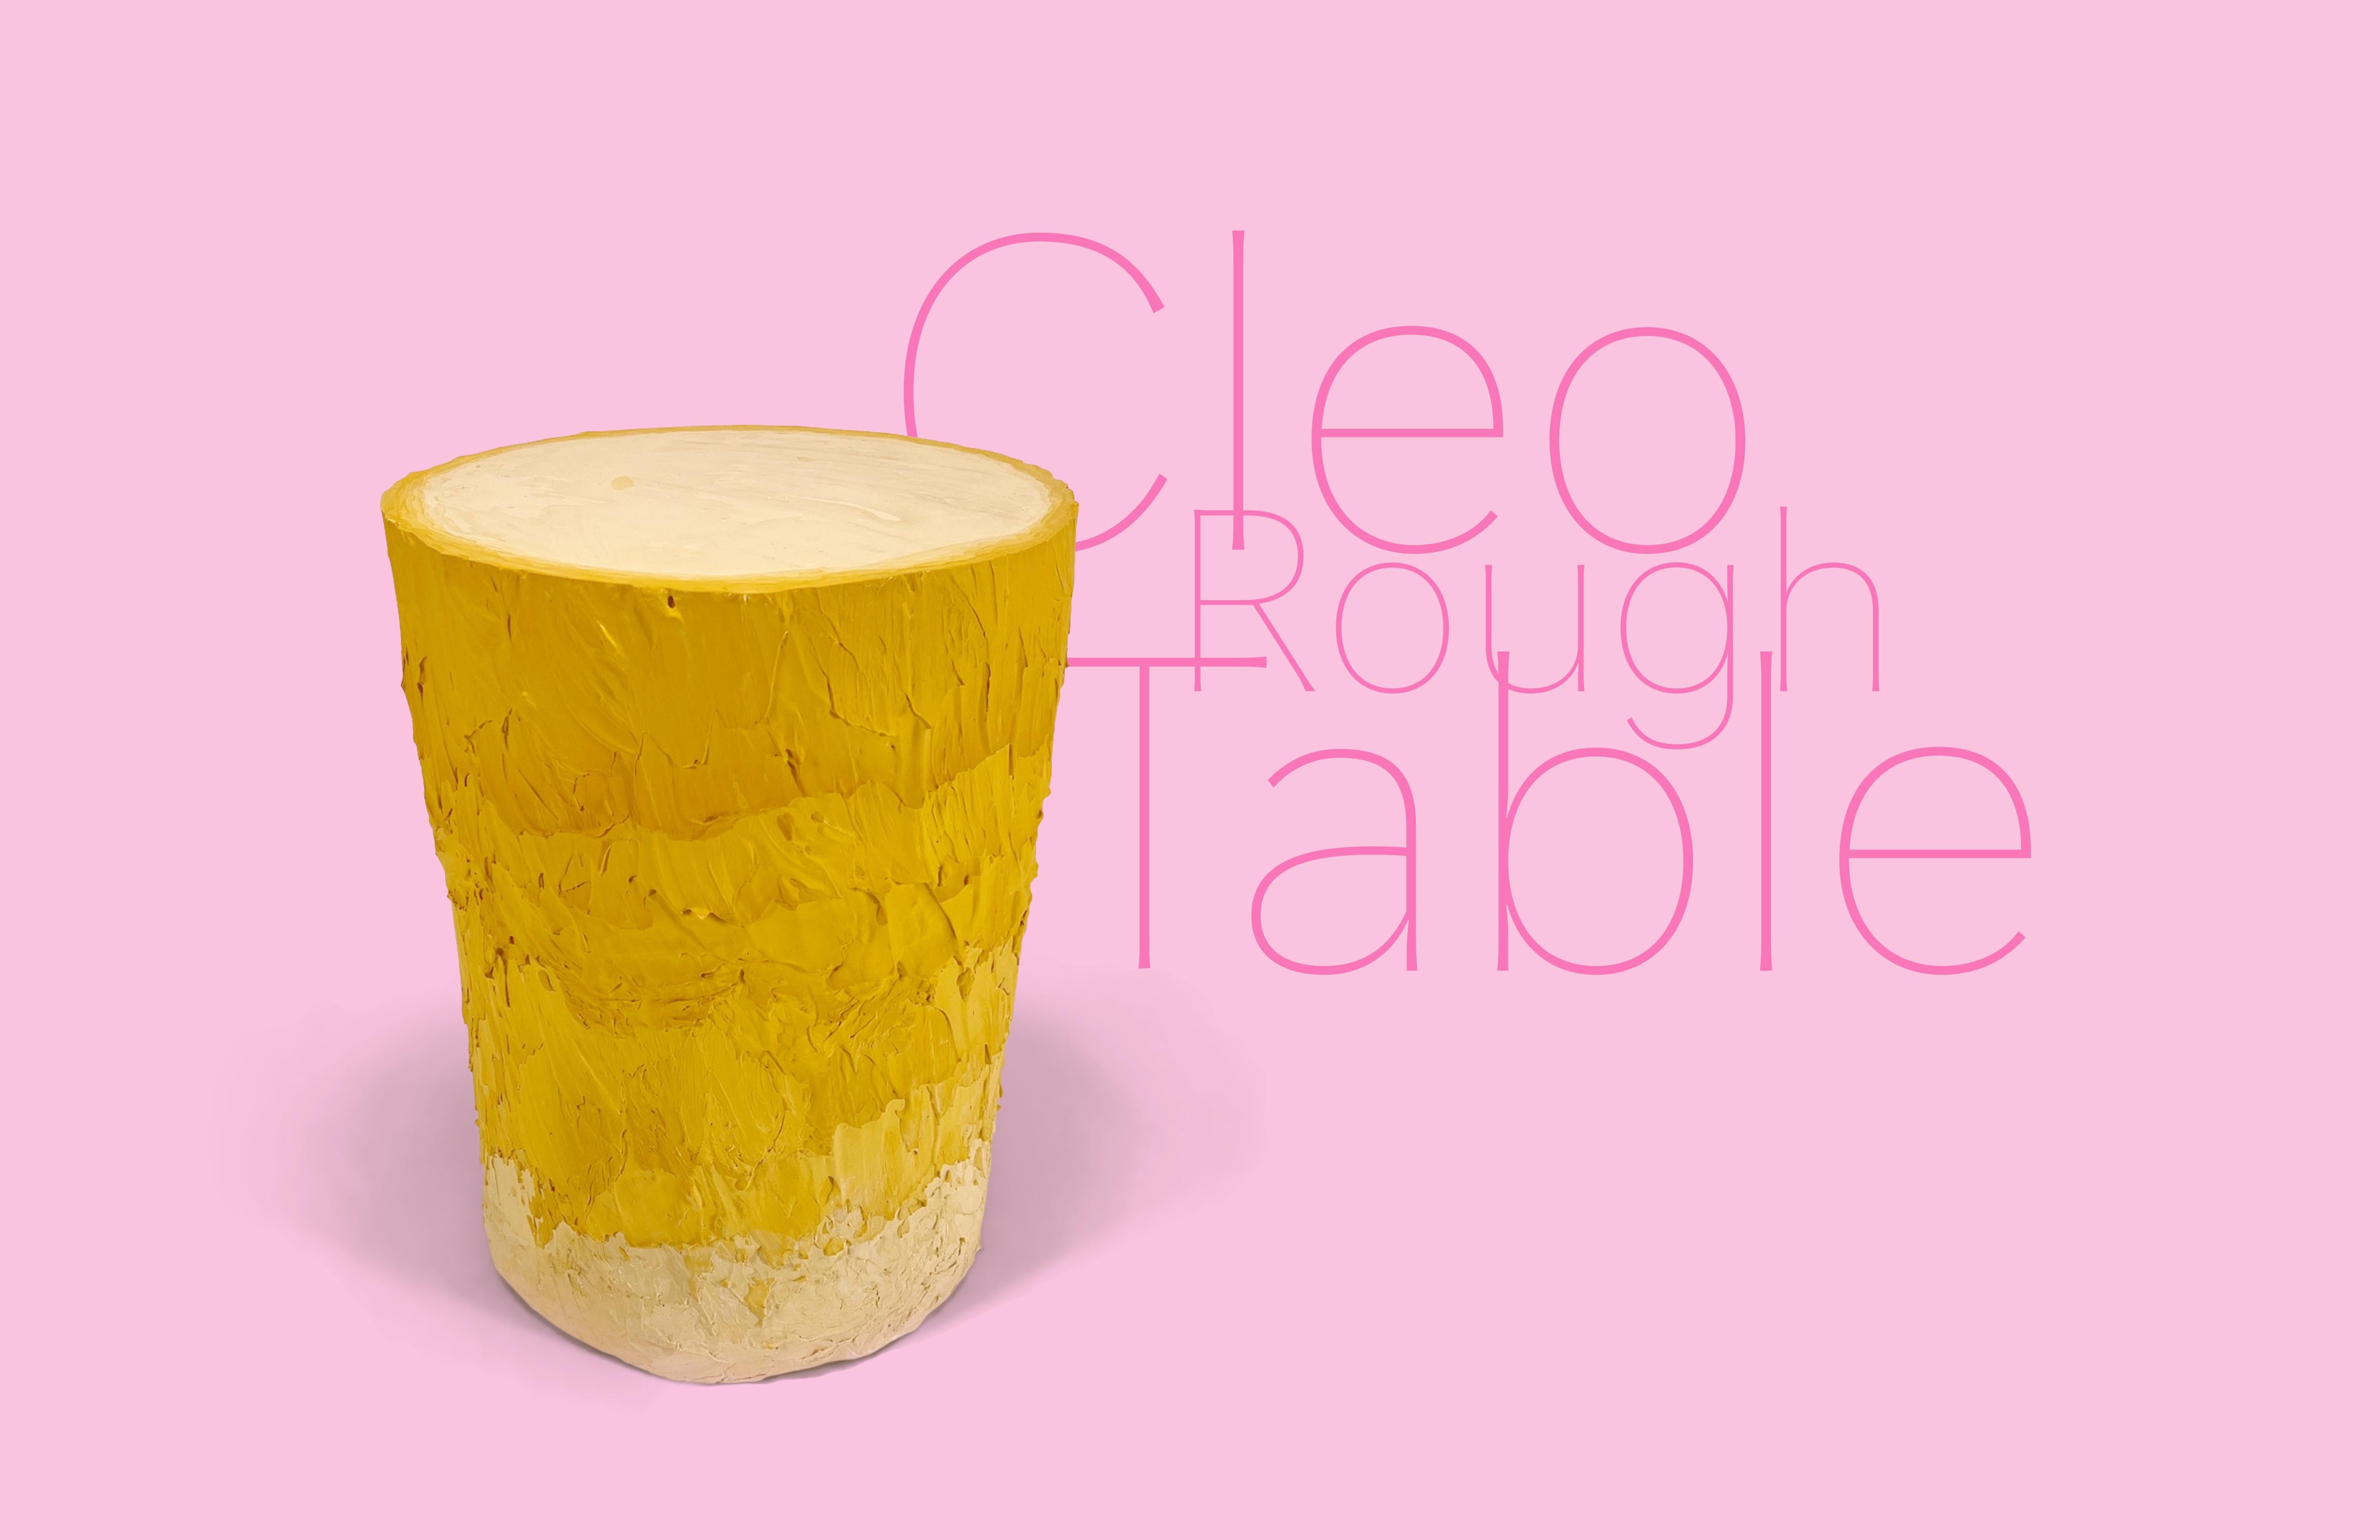 Cleo Rough Table by Dean and Dahl

L 17